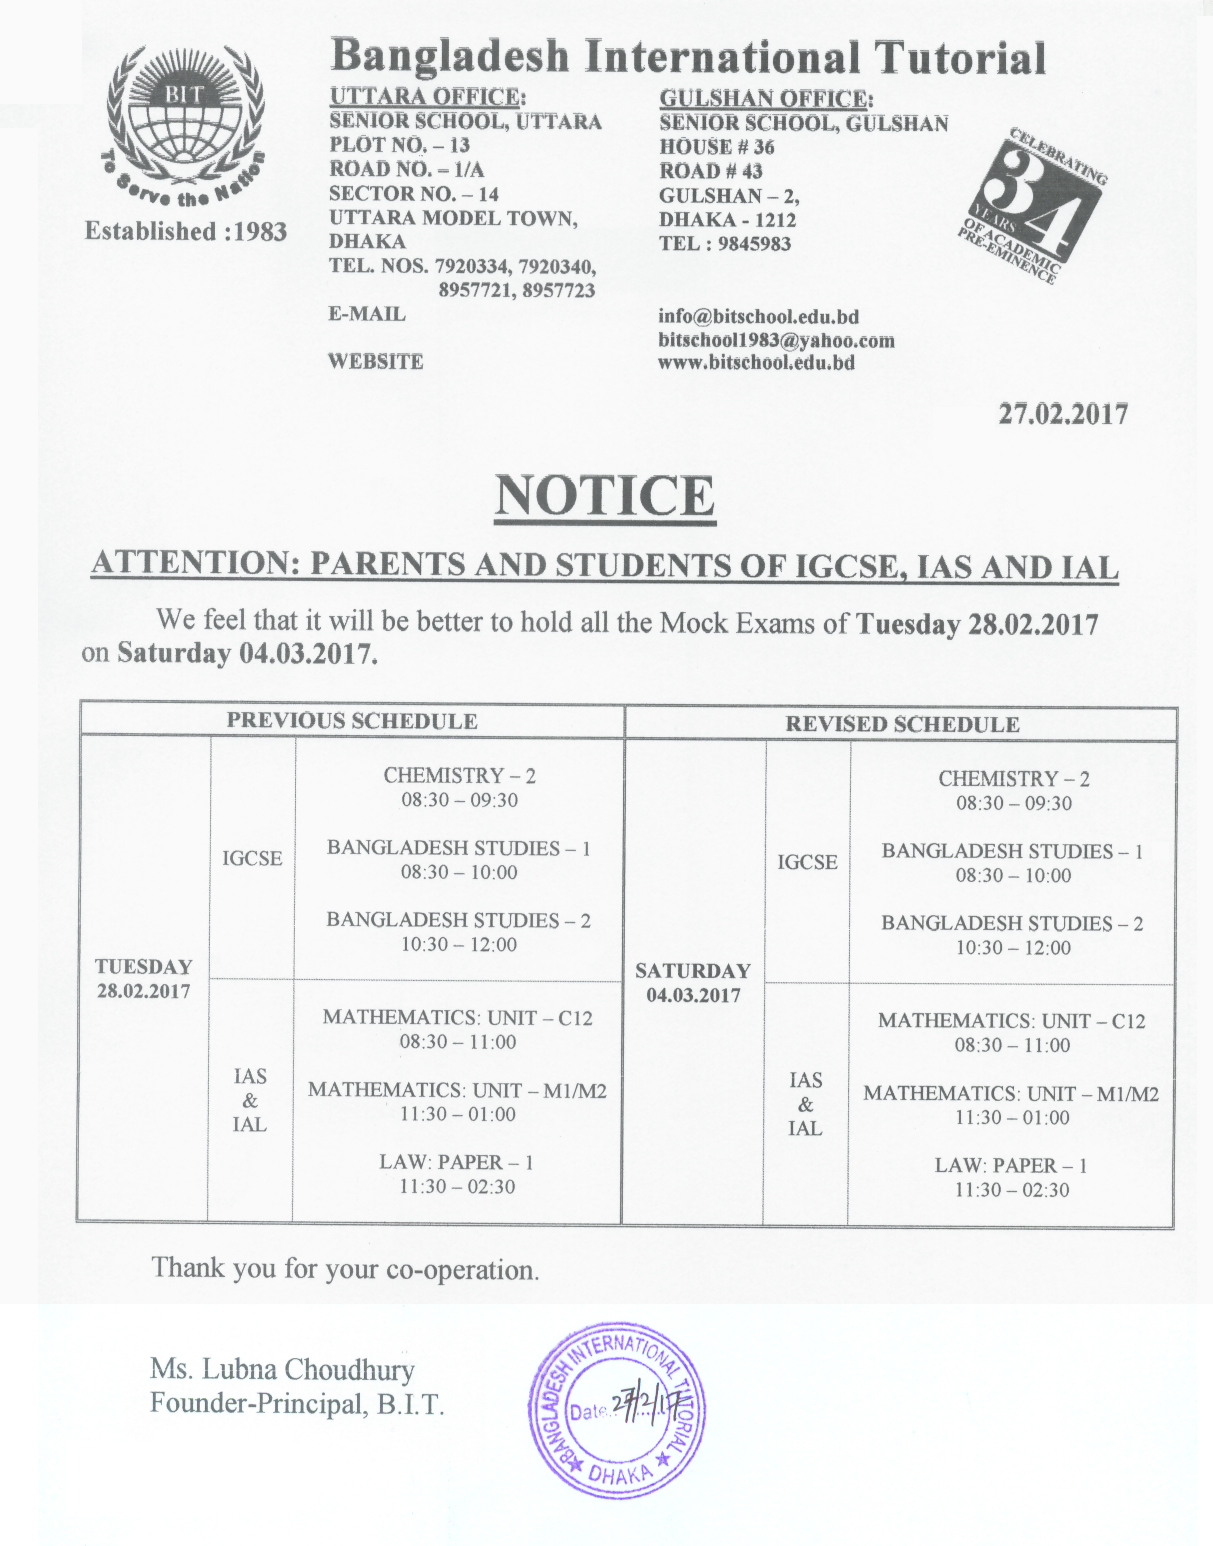 ATTENTION PARENTS AND STUDENTS OF IGCSE, IAS AND IAL